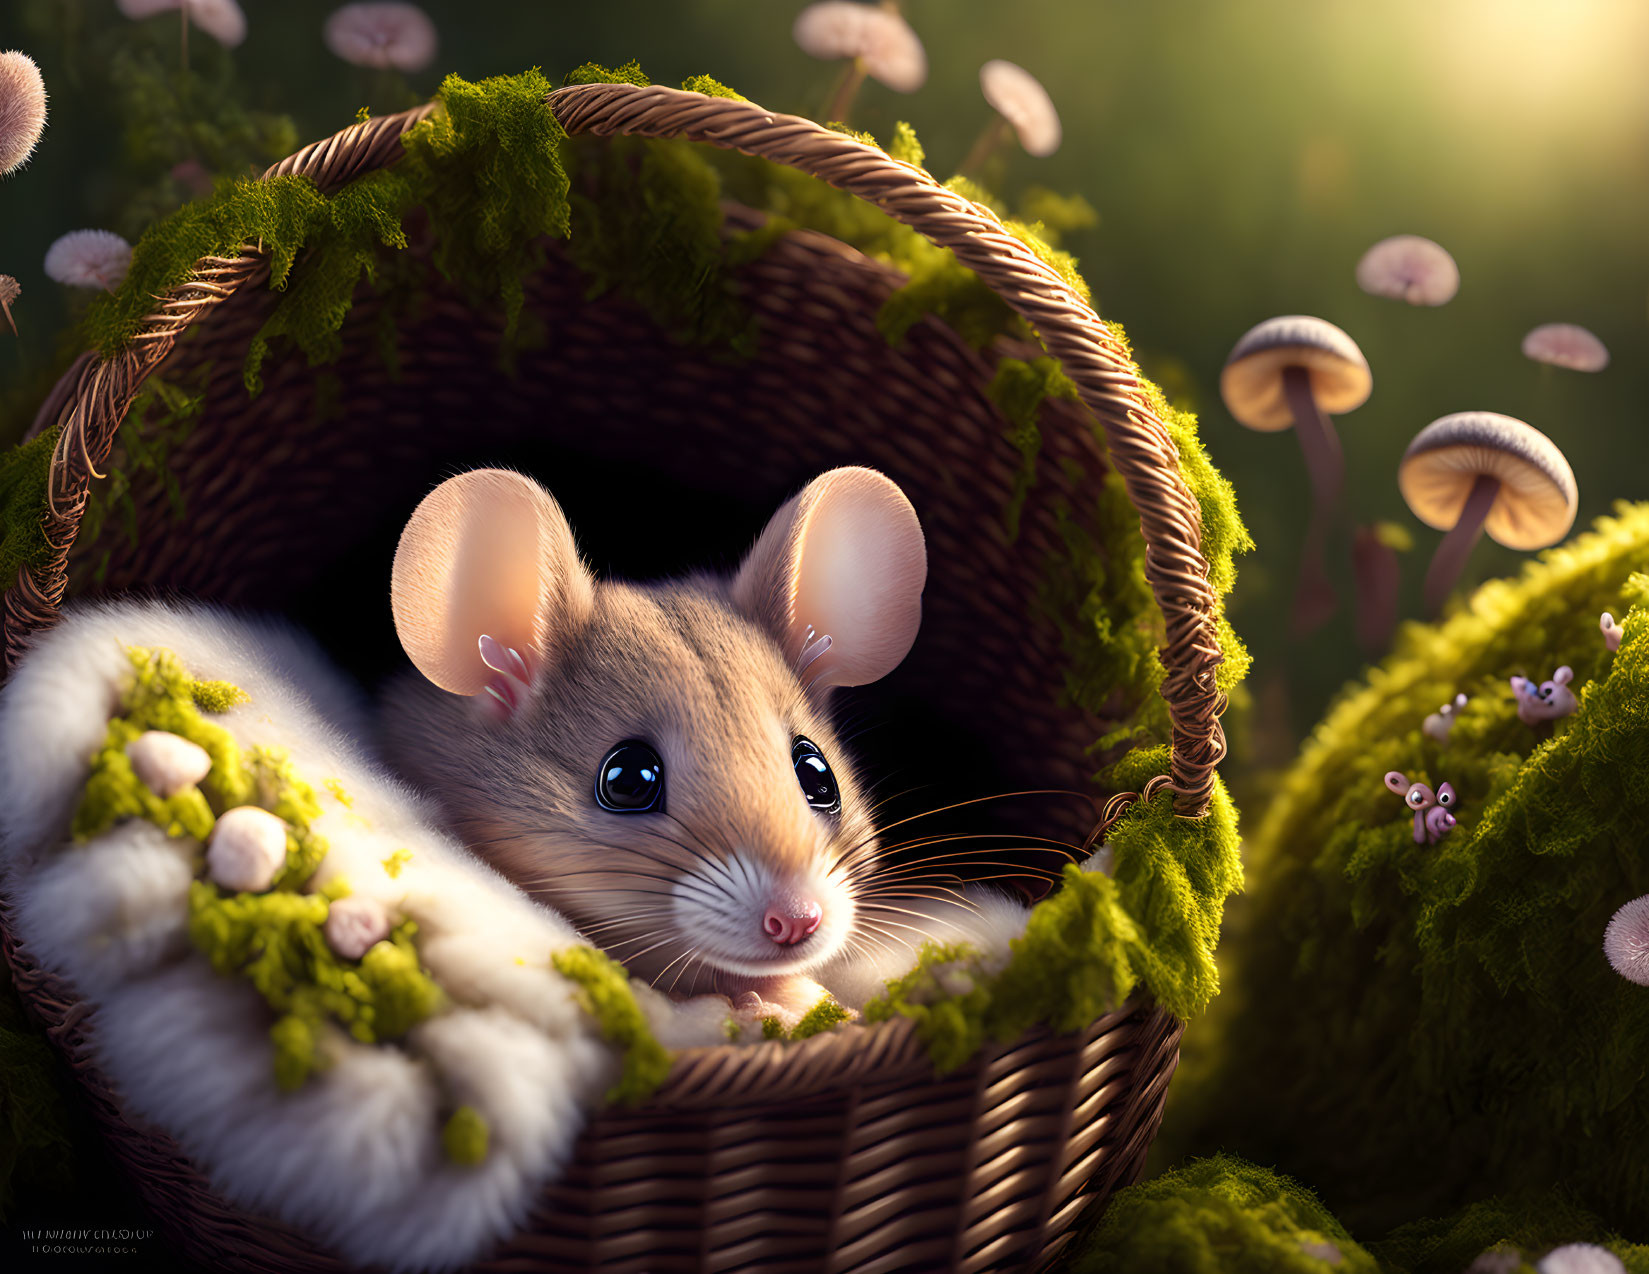 Adorable mouse in moss-covered basket with mushrooms and soft light